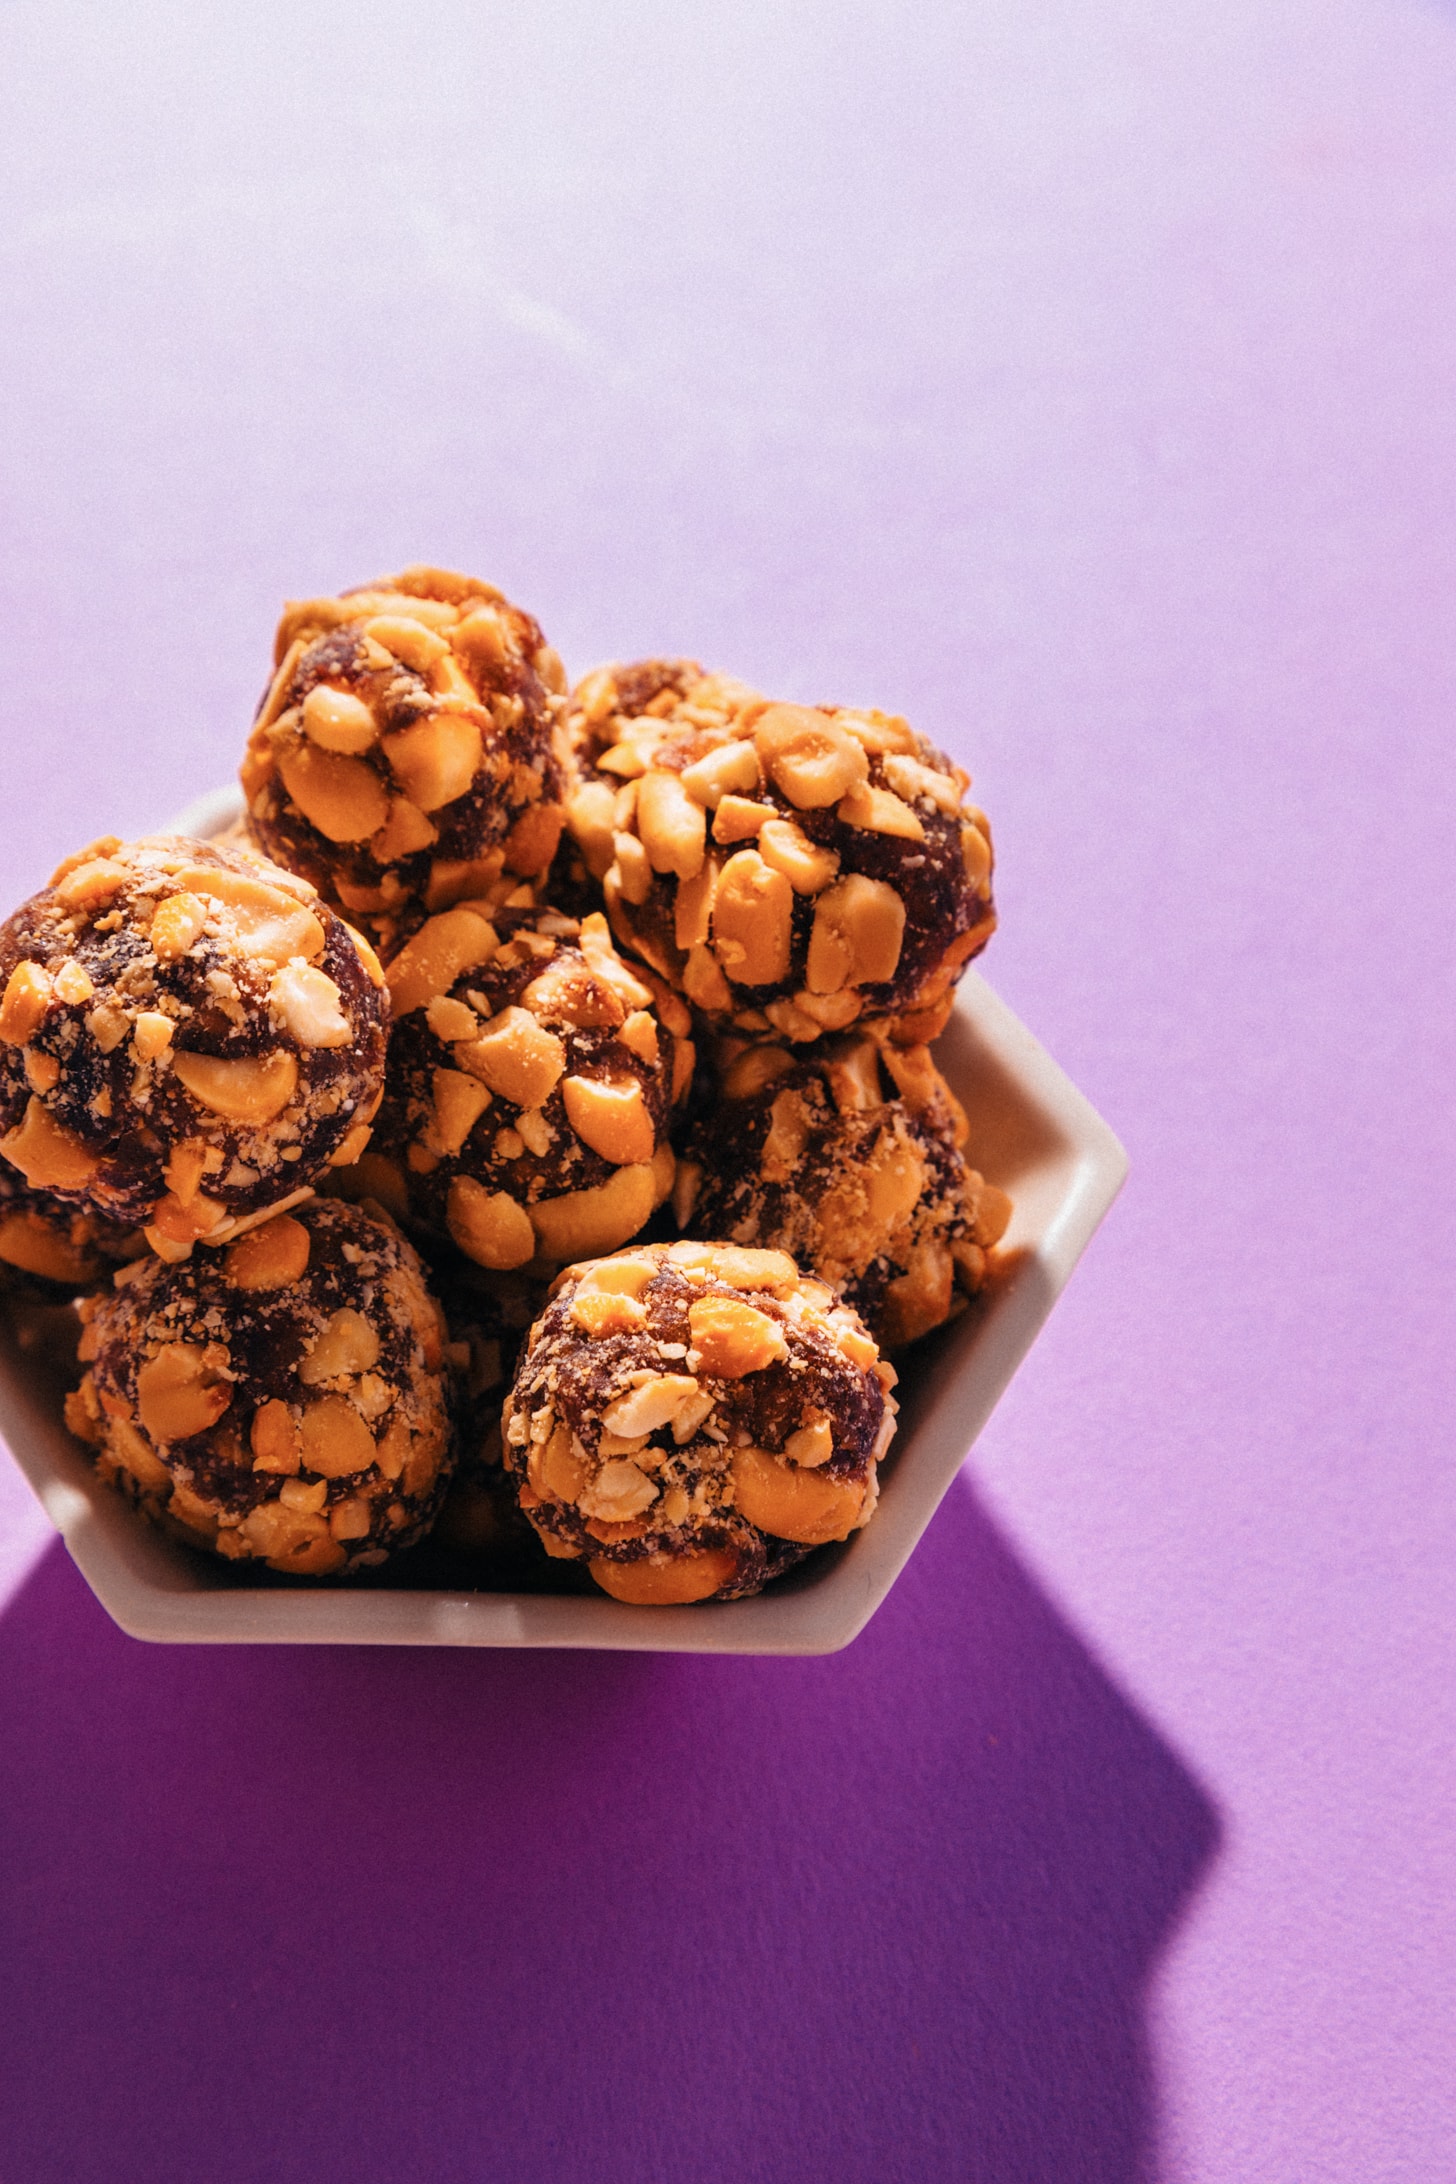 Bowl of PayDay Candy Bar Bites made with whole food ingredients